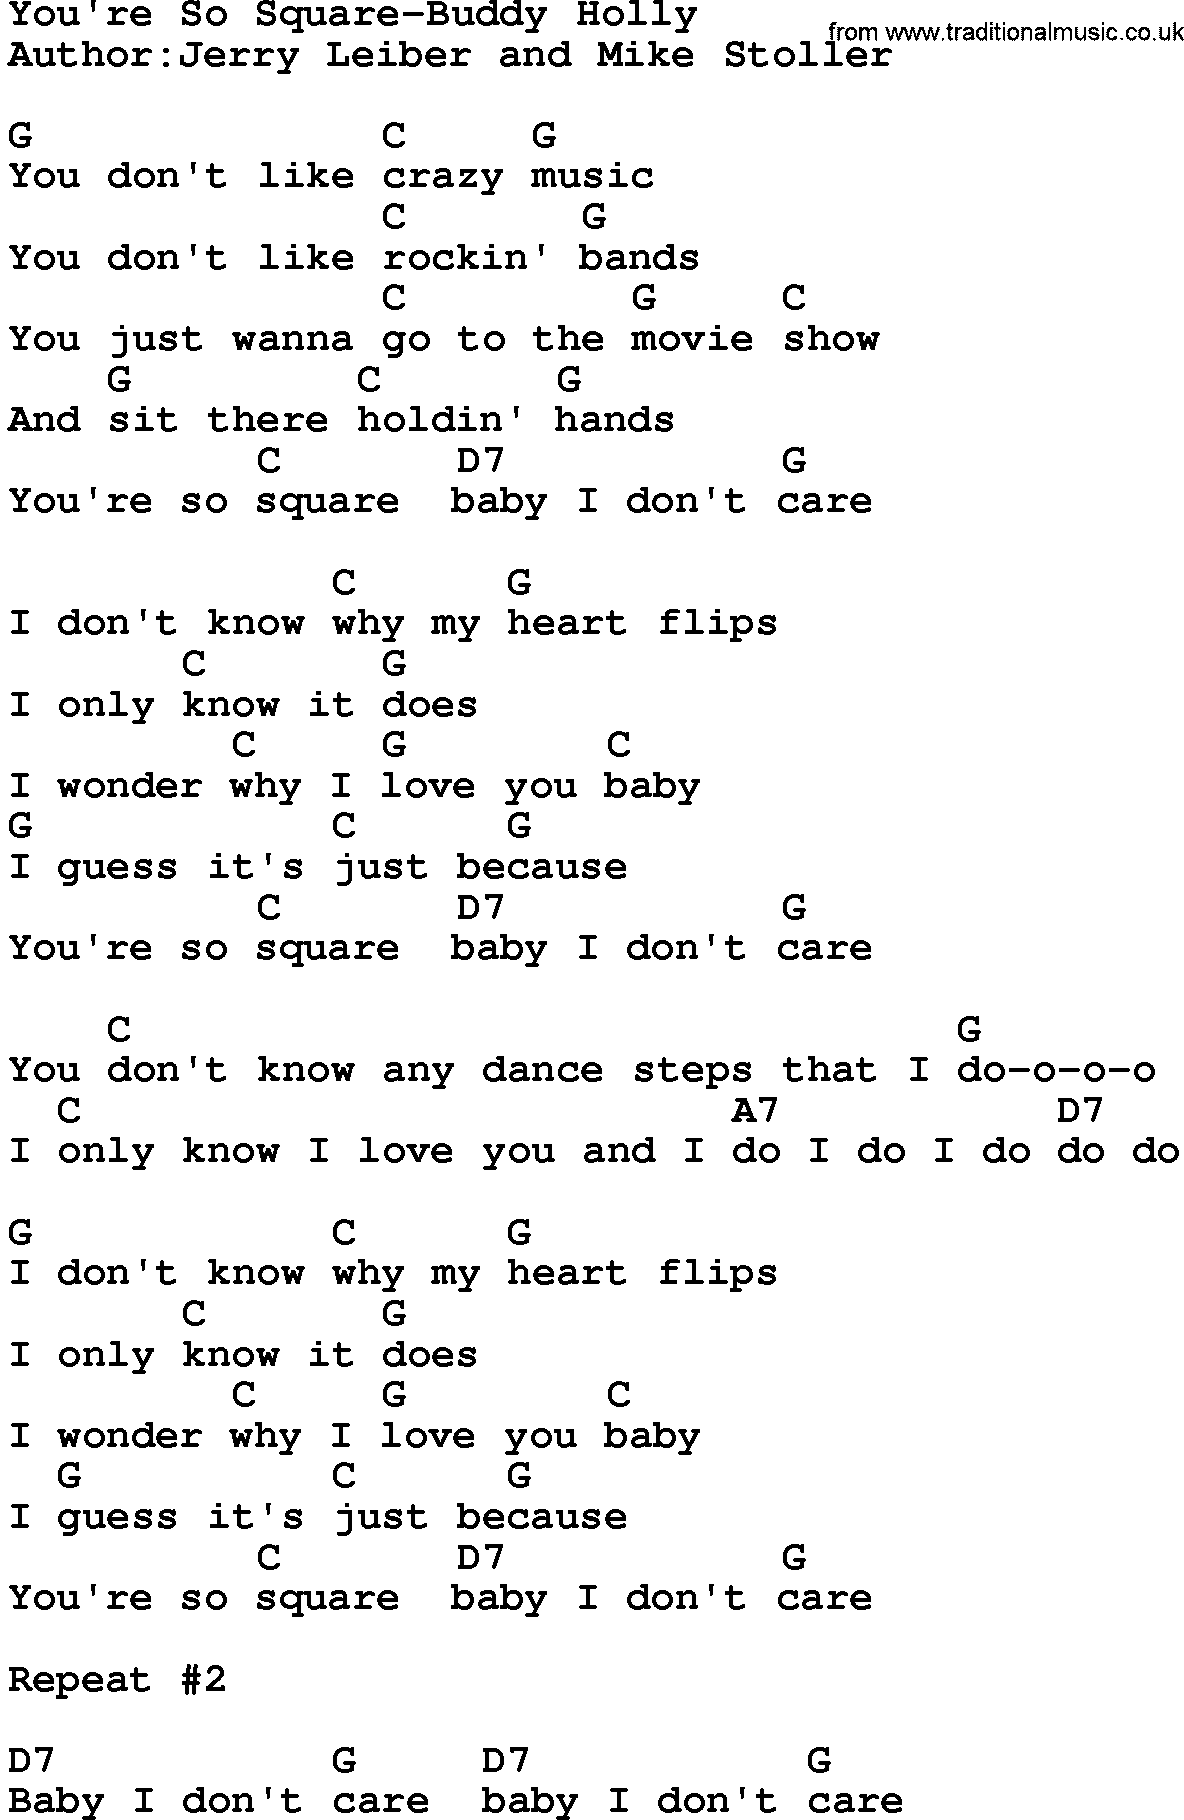 Country music song: You're So Square-Buddy Holly lyrics and chords